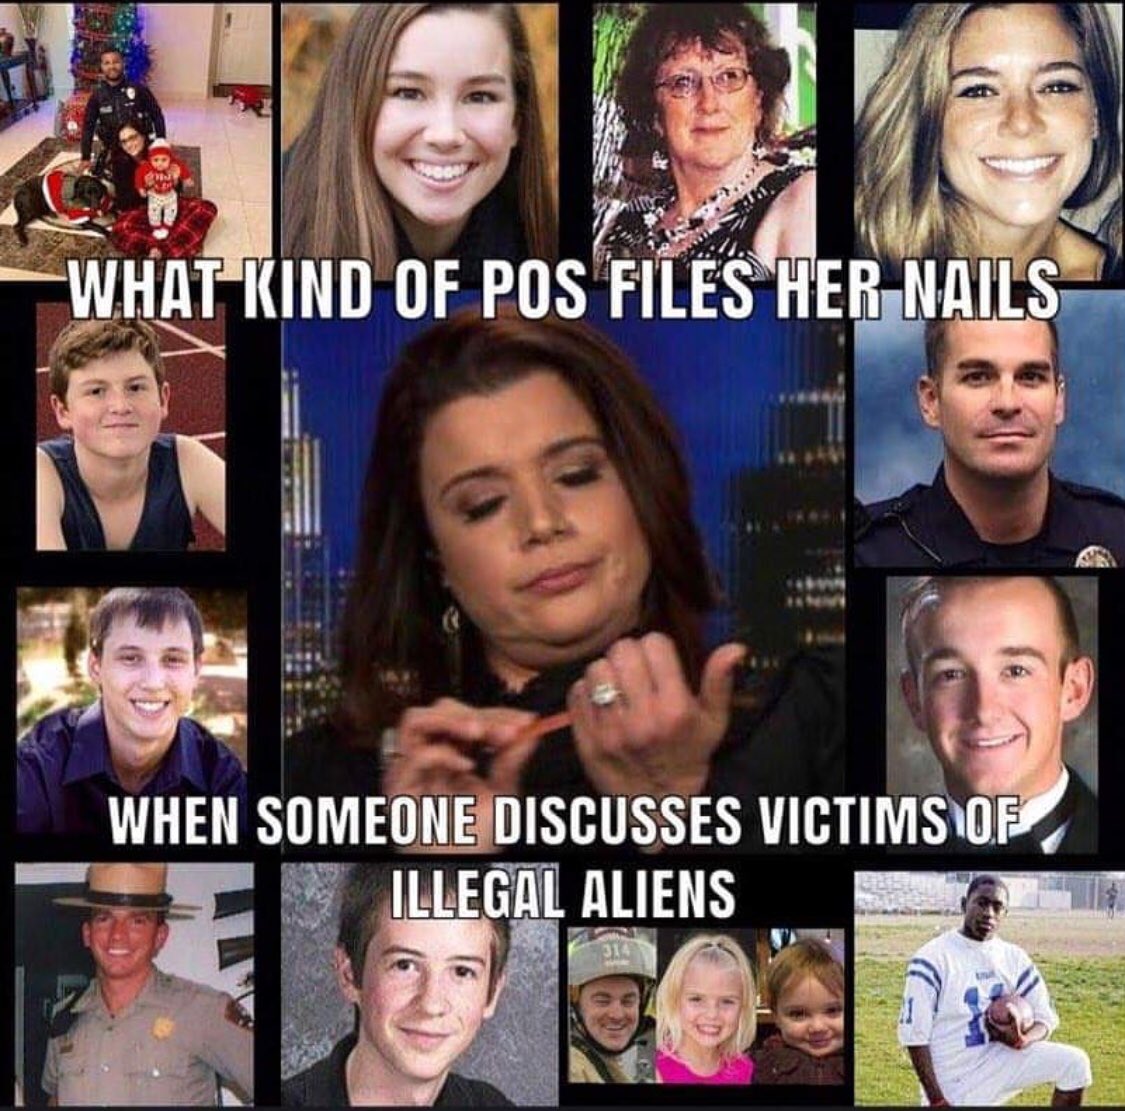 What kind of POS files her nails when someone discuses Victims of Illegals! Retweet if you agree! ⤵️ #PaintOurCountryRed #StopTheTrillionDollarTransfer #BuildTheDamnWallNow #ItsBorderSecurityStupid